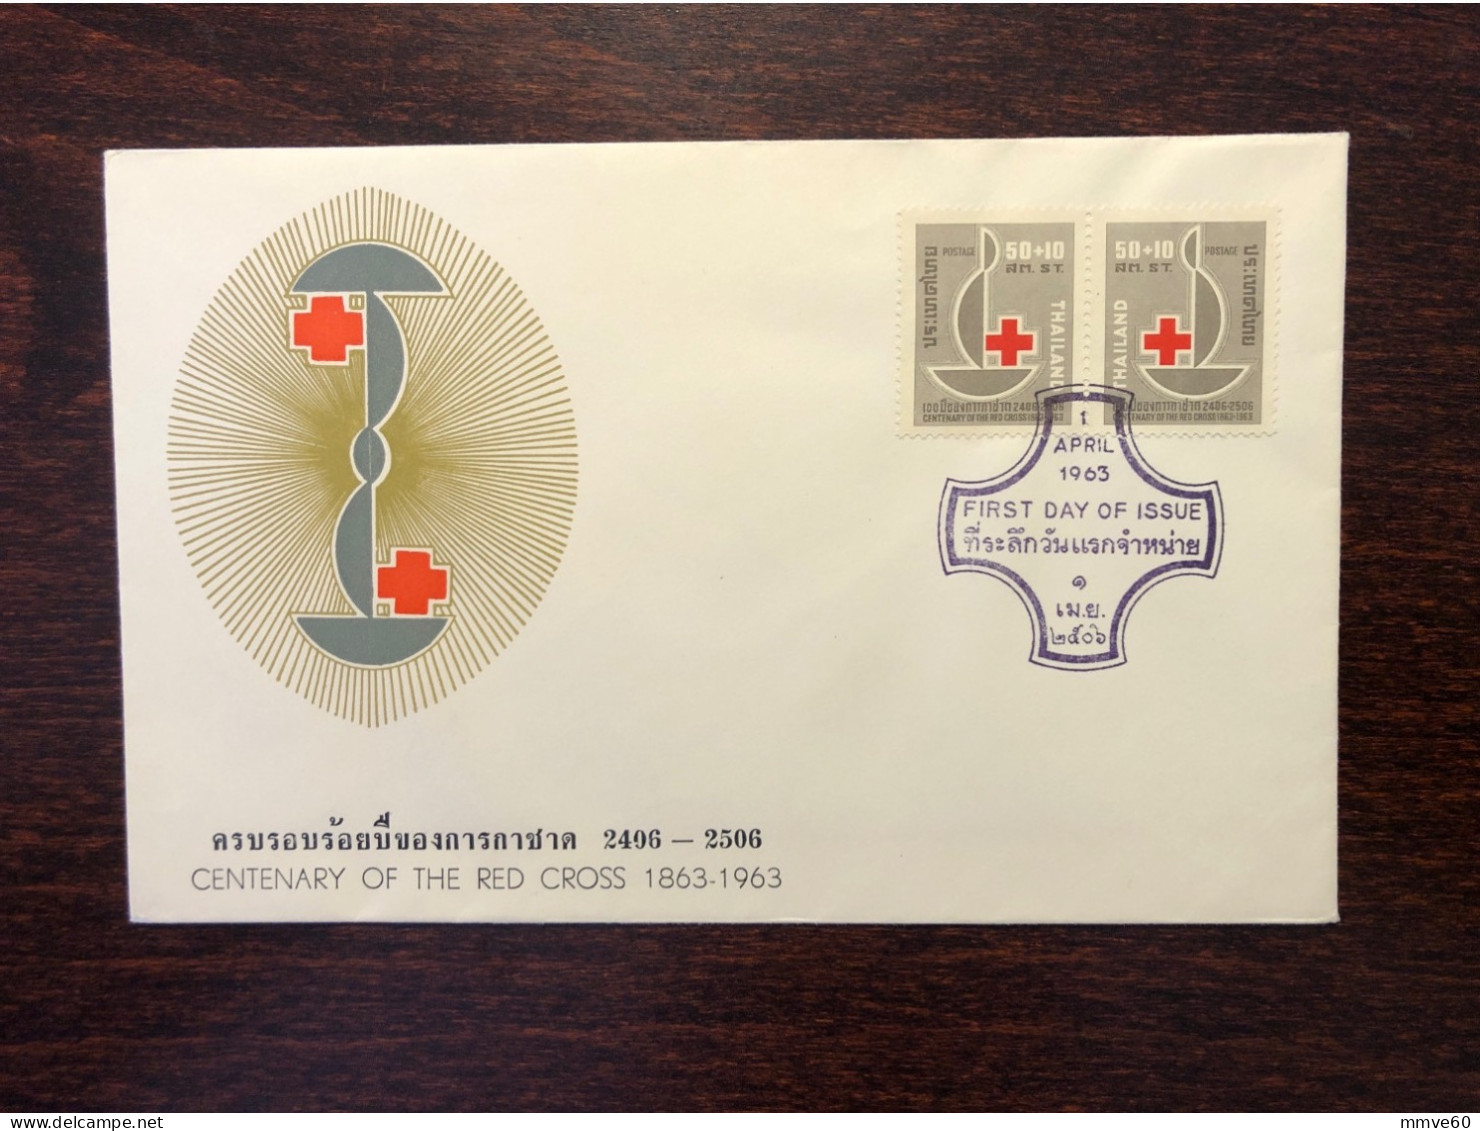 THAILAND FDC COVER 1963 YEAR RED CROSS HEALTH MEDICINE STAMPS - Thailand